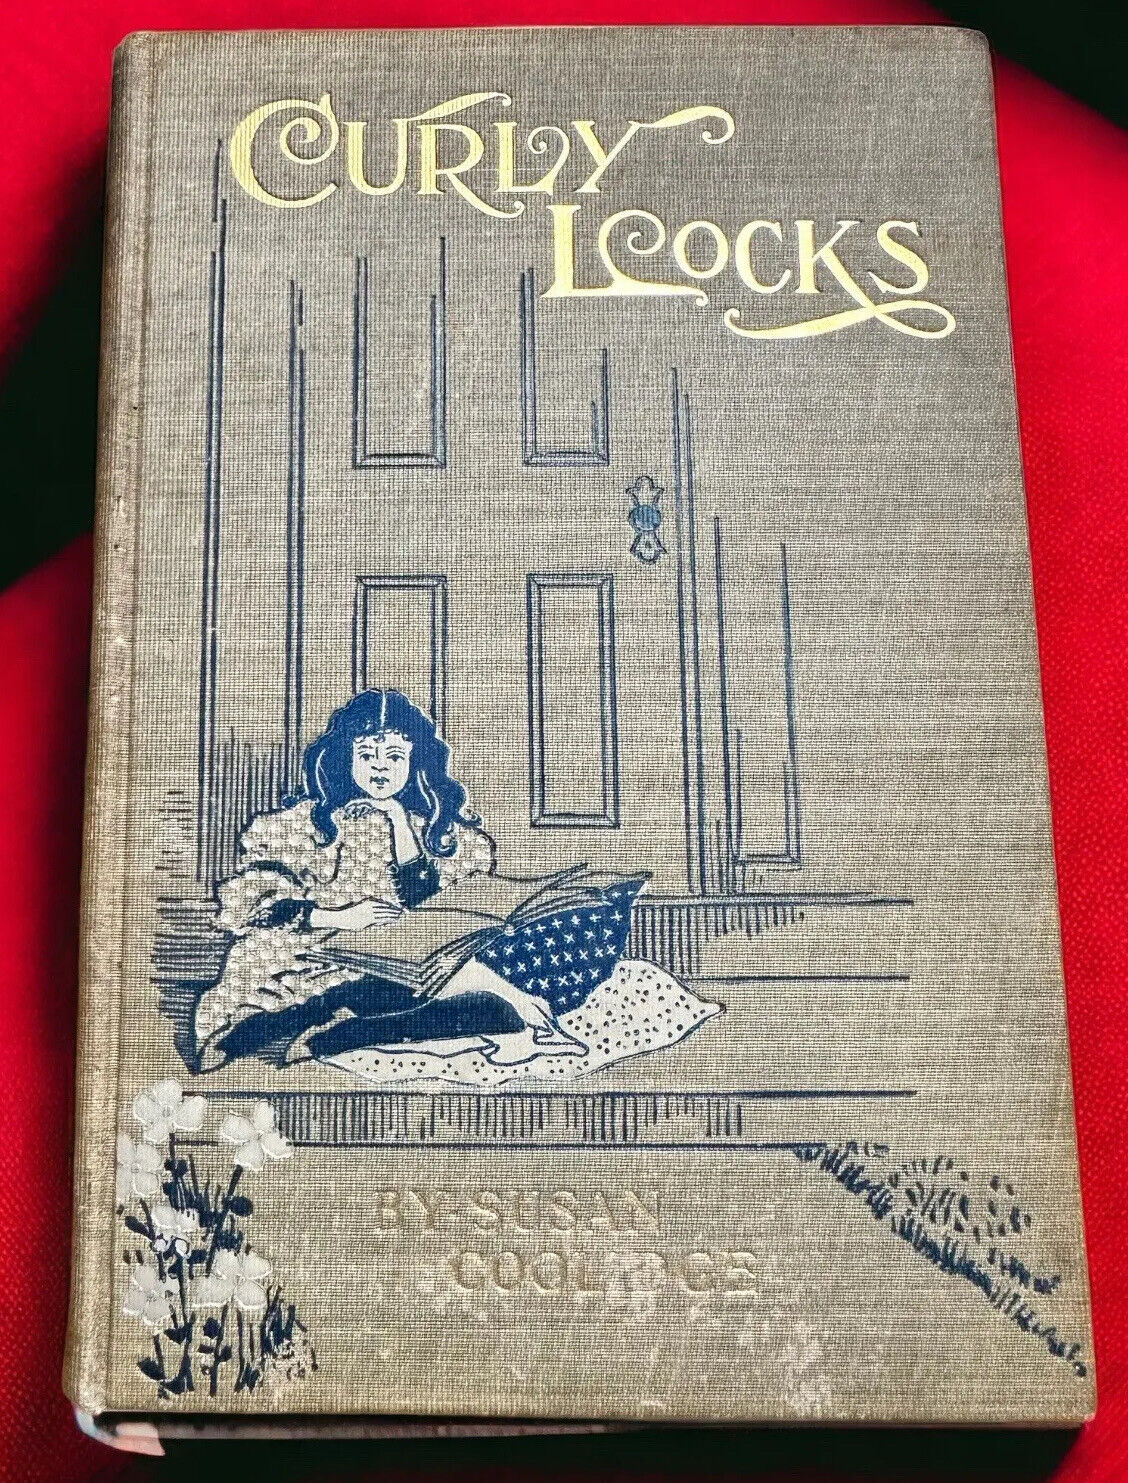 Curly Locks Vintage 1899 Book Hard Cover Black And White Illustrations